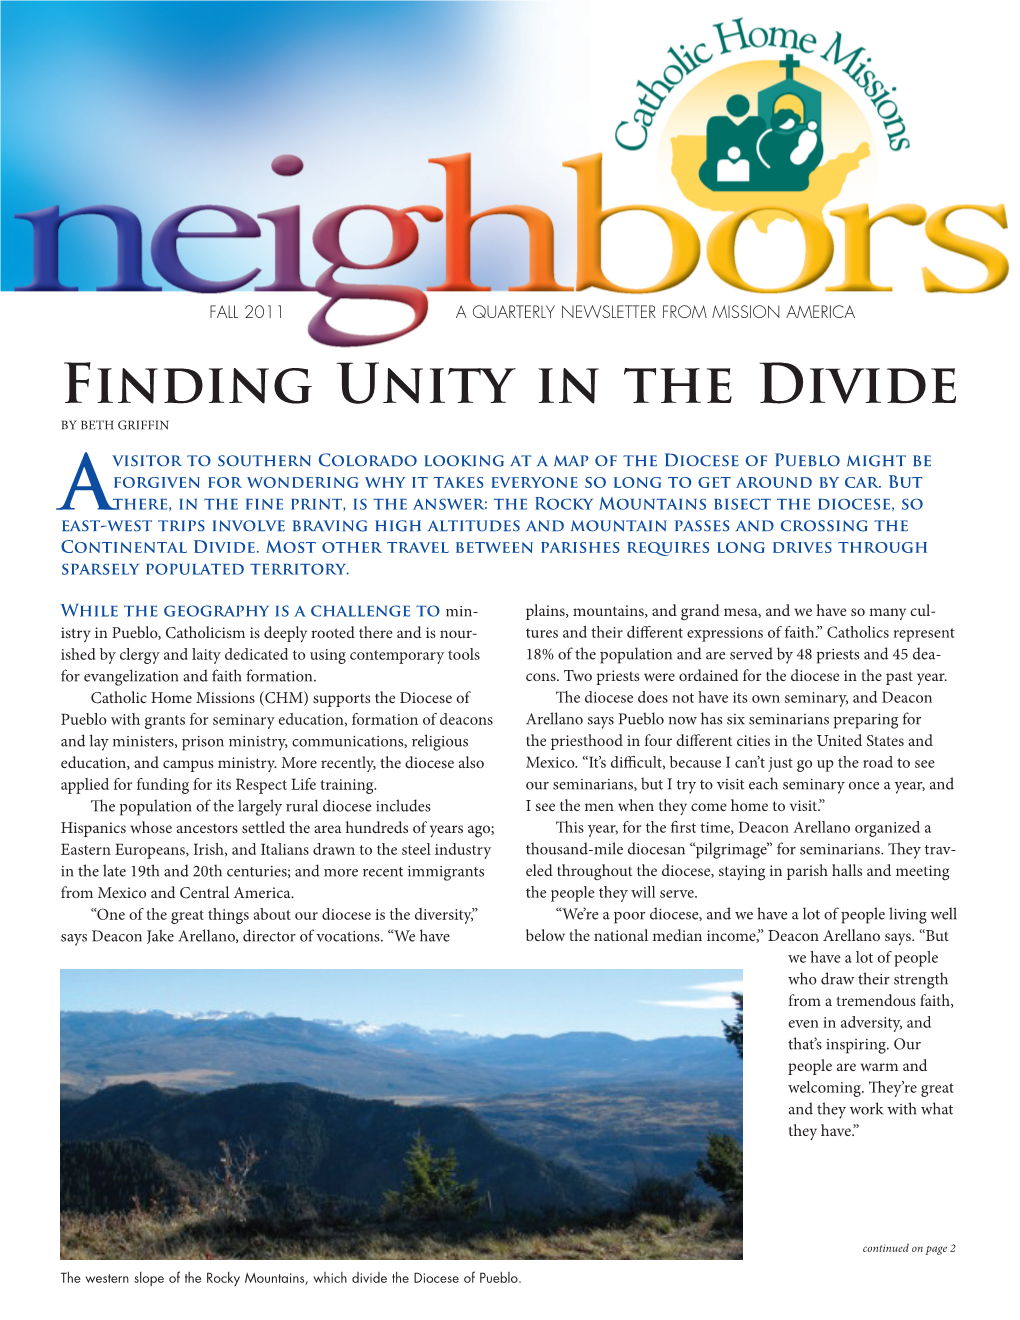 Finding Unity in the Divide by BETH GRIFFIN